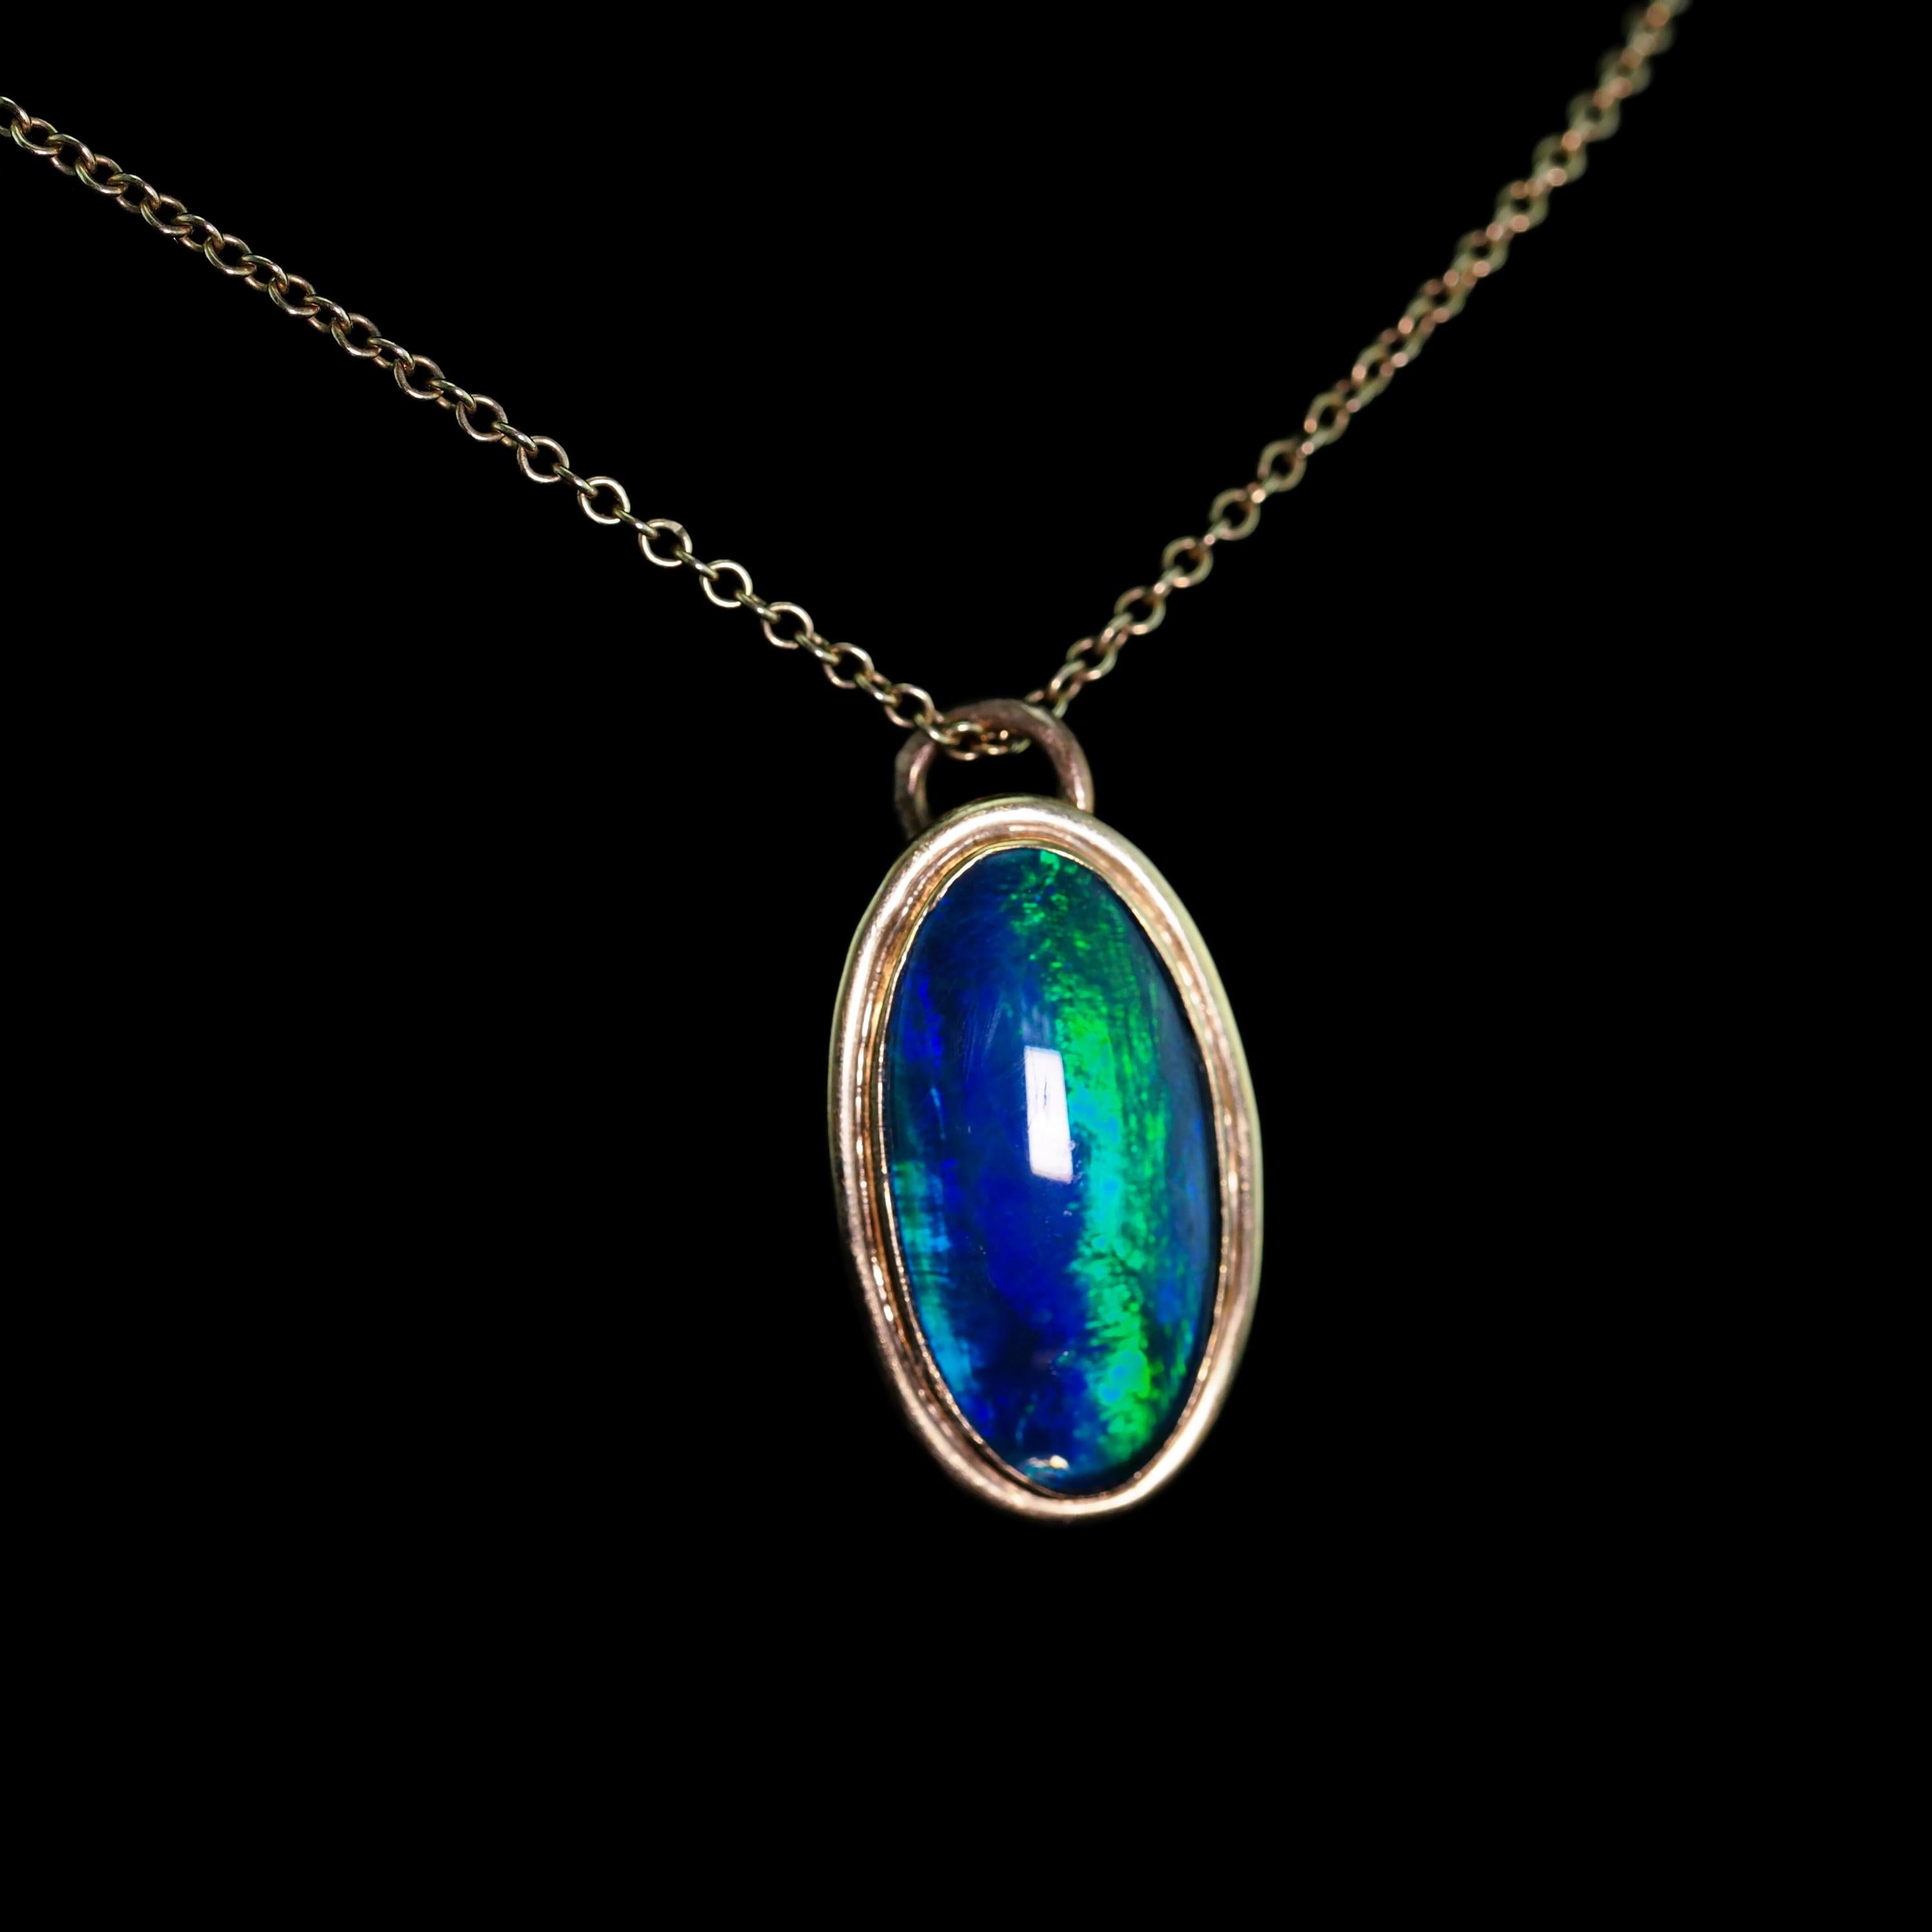 9K Gold Blue/Green Ammolite Pendant & Chain Necklace For Sale 1